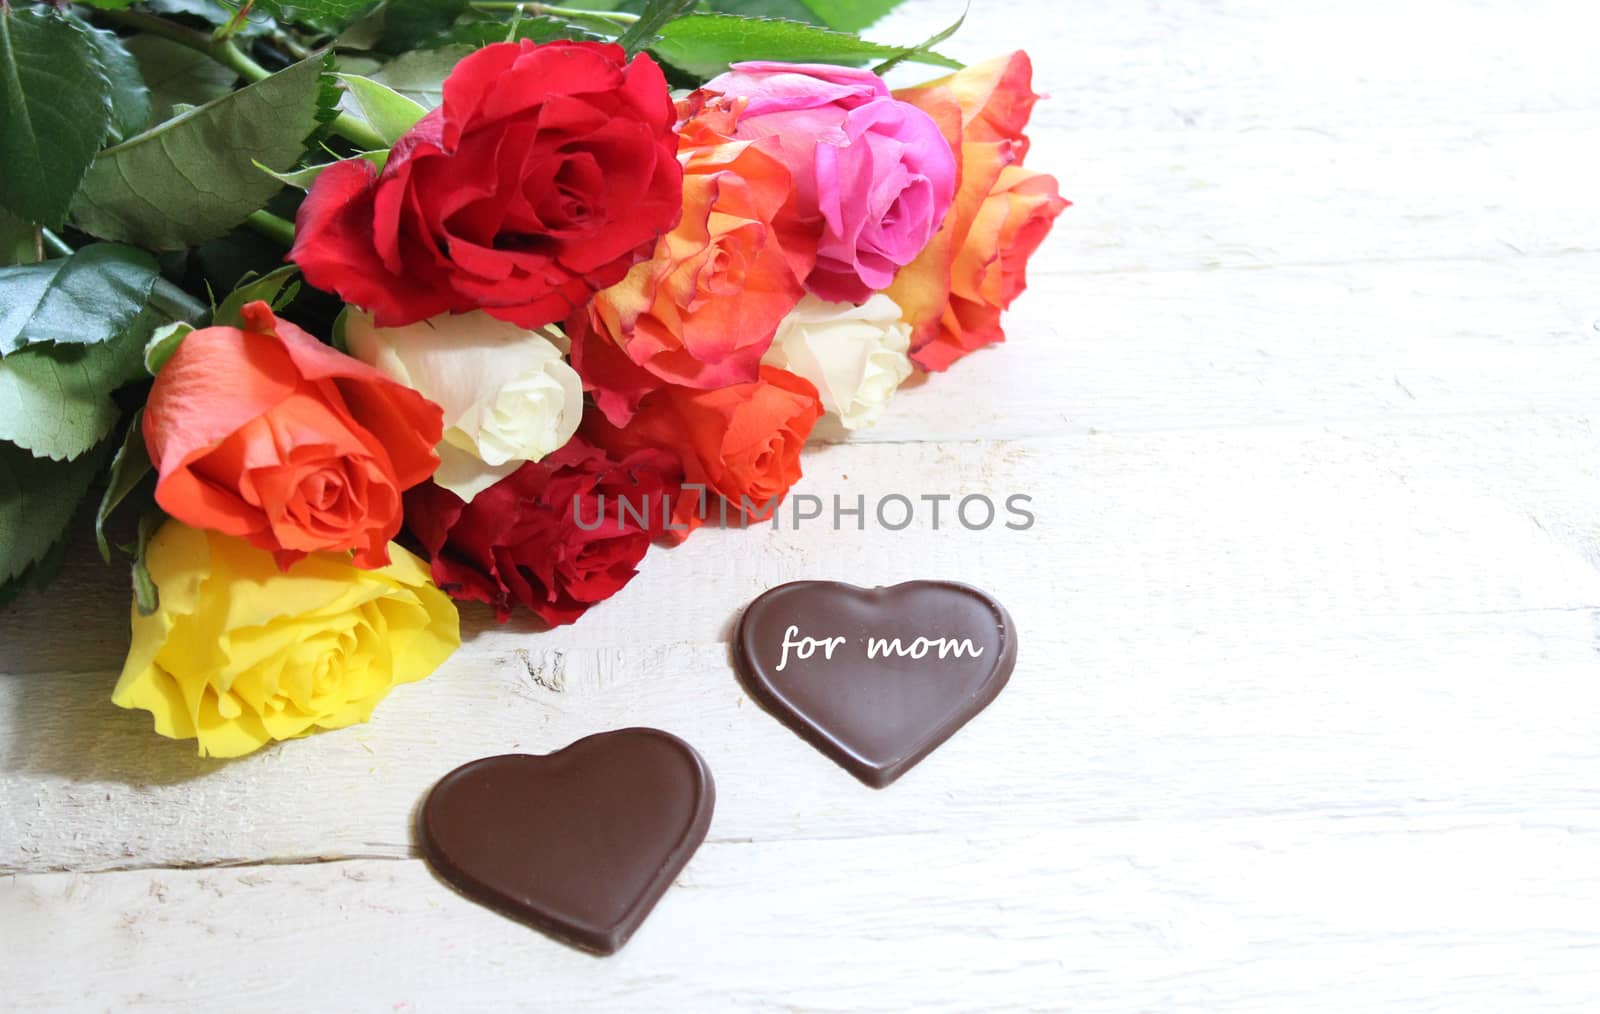 colourful roses and chocolate hearts for mother`s day by martina_unbehauen